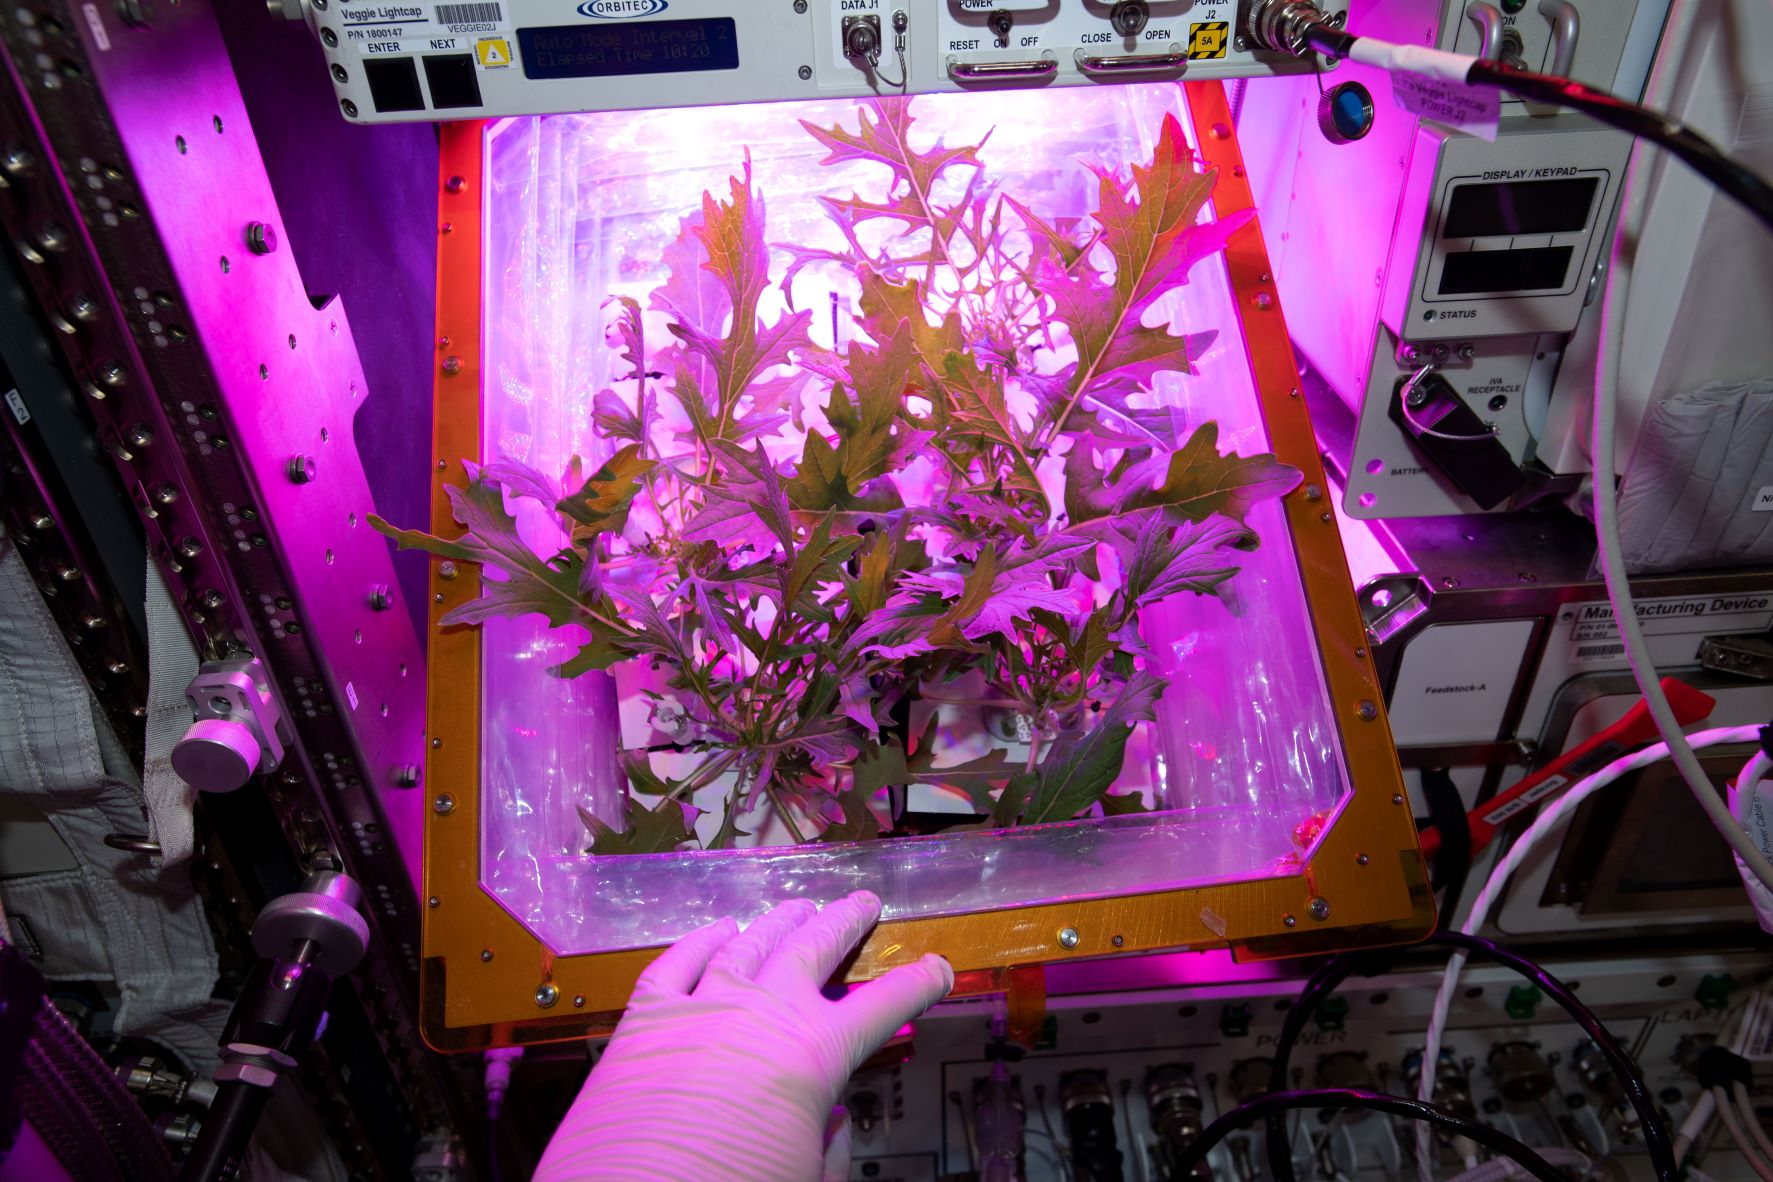 A NASA astronaut aboard the International Space Station checks on the plants in the Vegetable Production System, called Veggie. An ongoing NASA study seeks to examine the types of microbes present on Veggie’s hardware. 